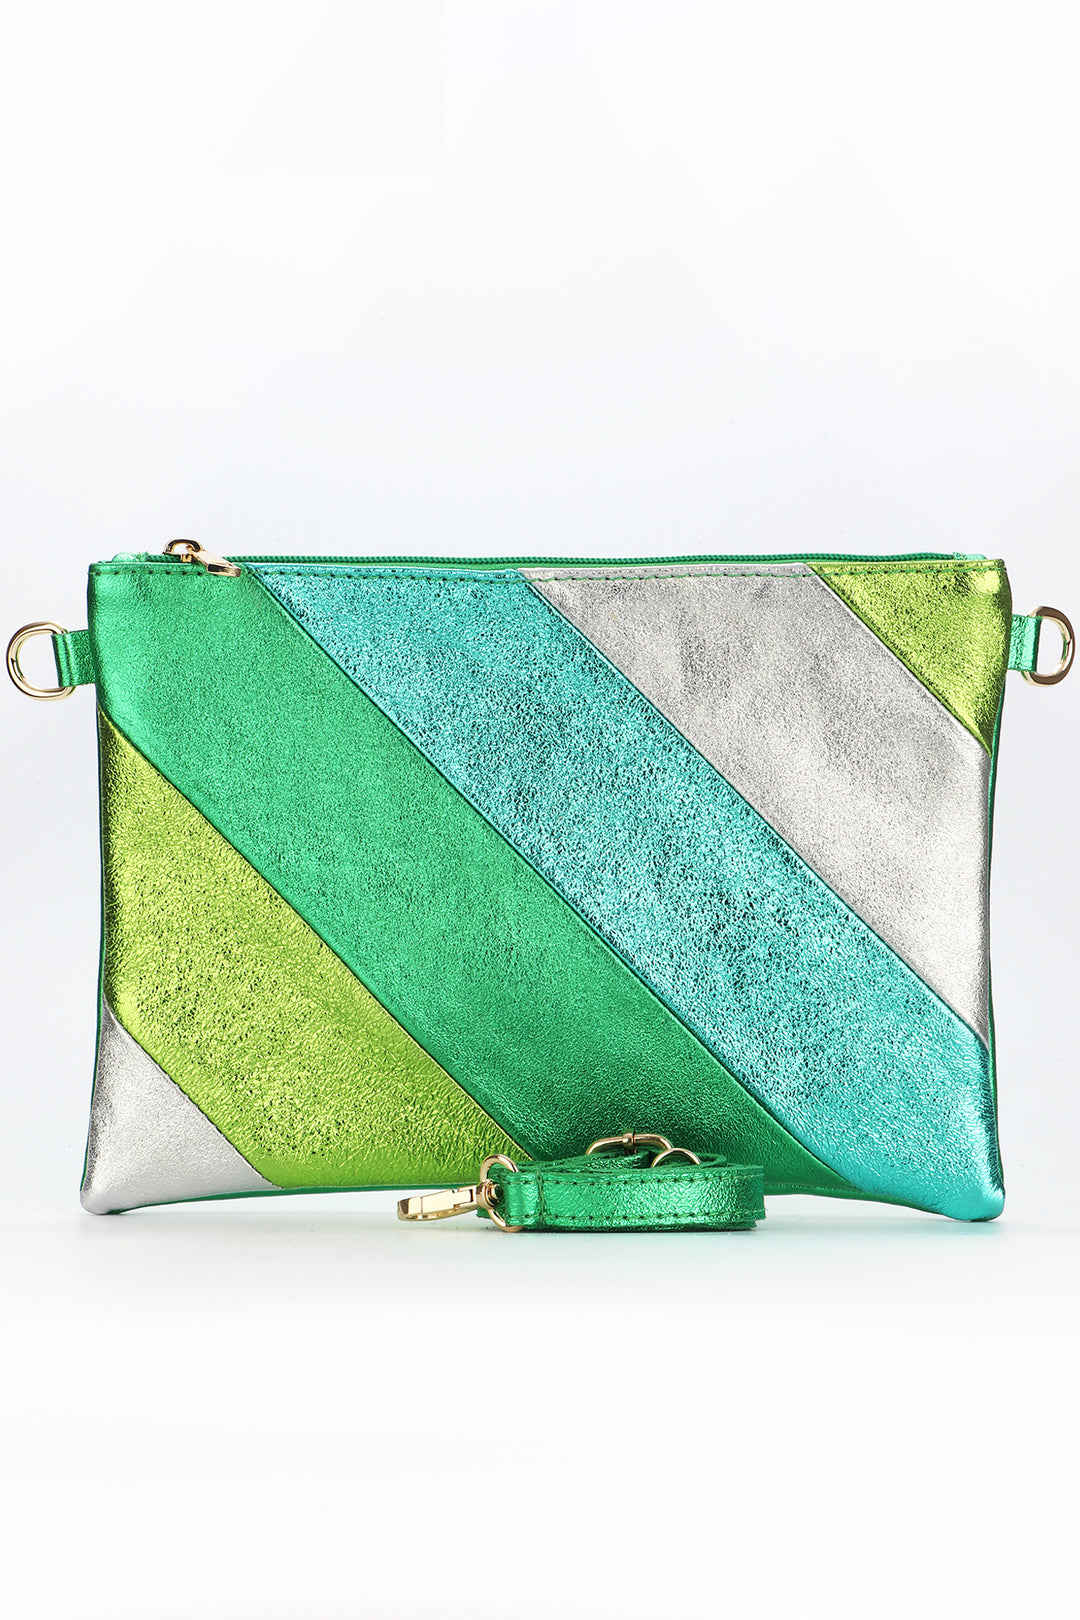 leather clutch bag with a green, silver, turquoise striped pattern with detachable green wrist strap